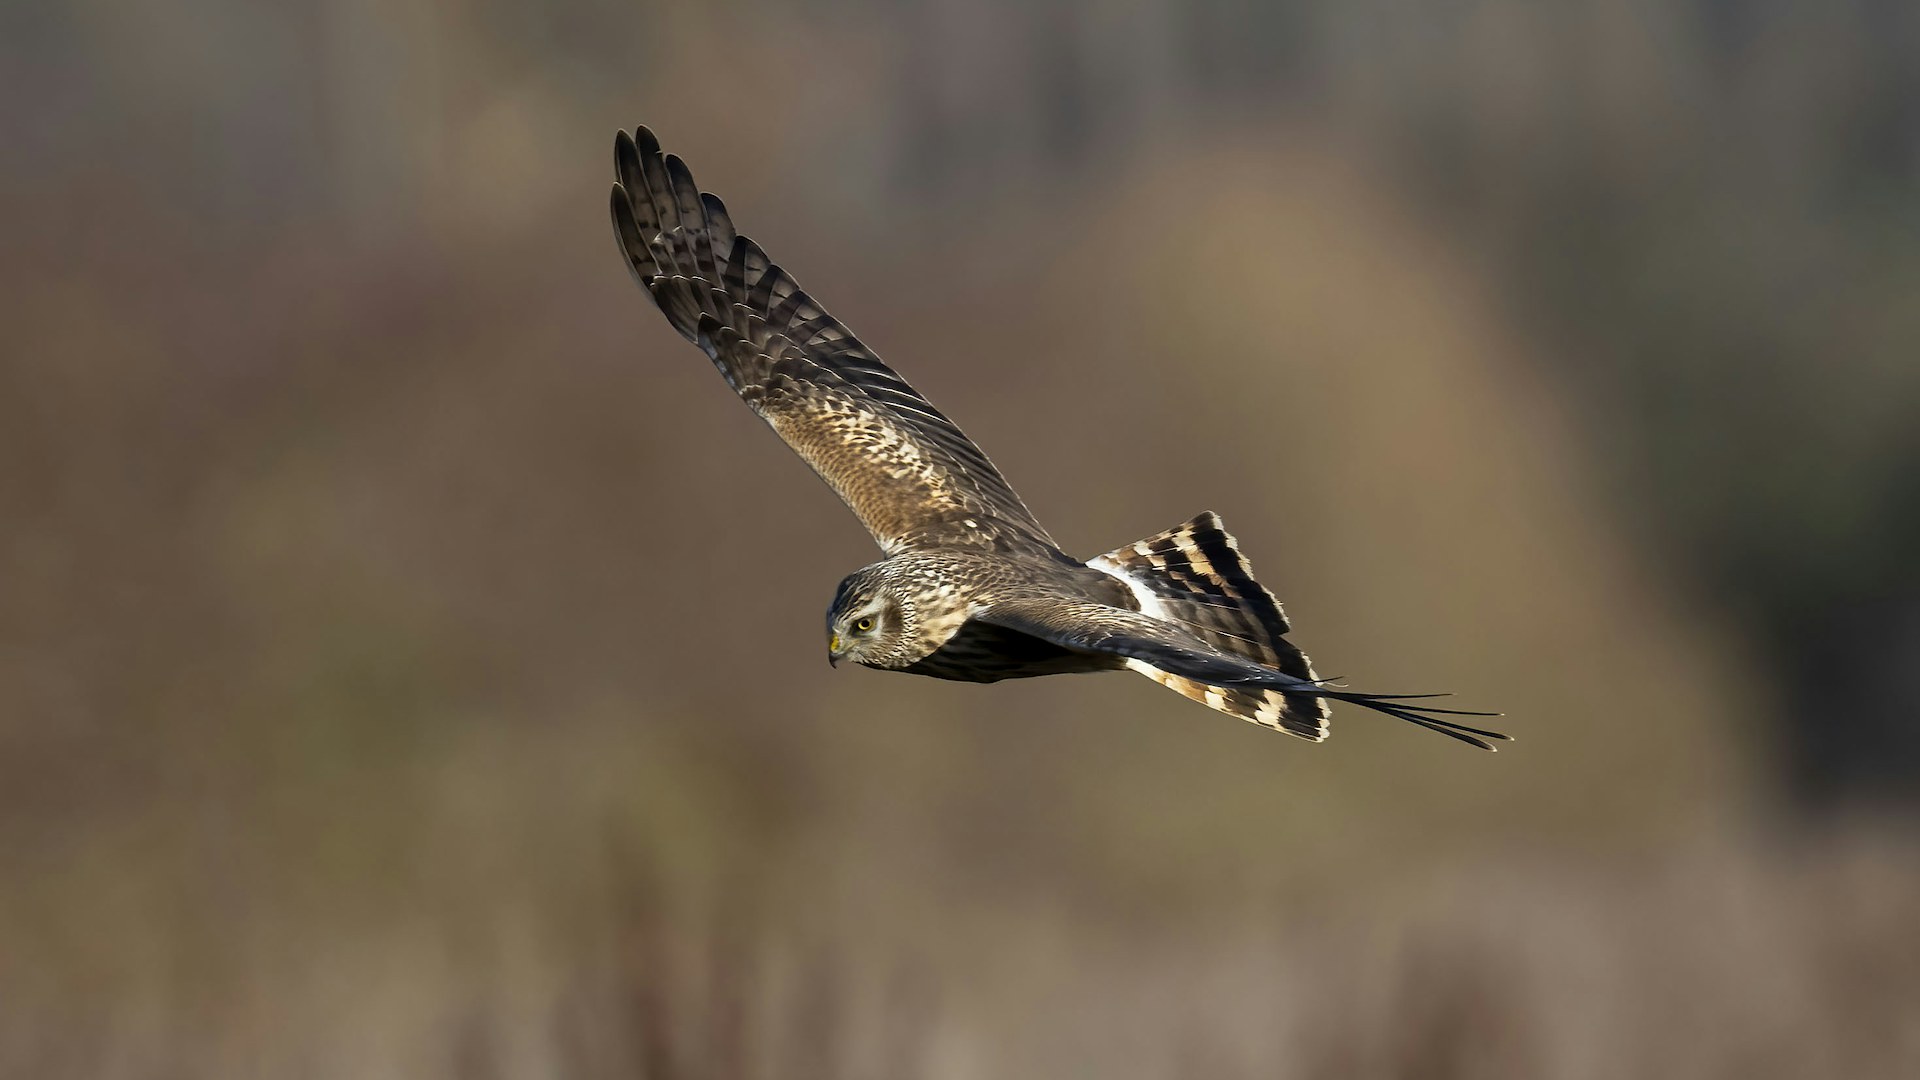 Hen harrier soaring through the air above the Wild Wrendale Rewilding Project in Searby, Lincolnshire